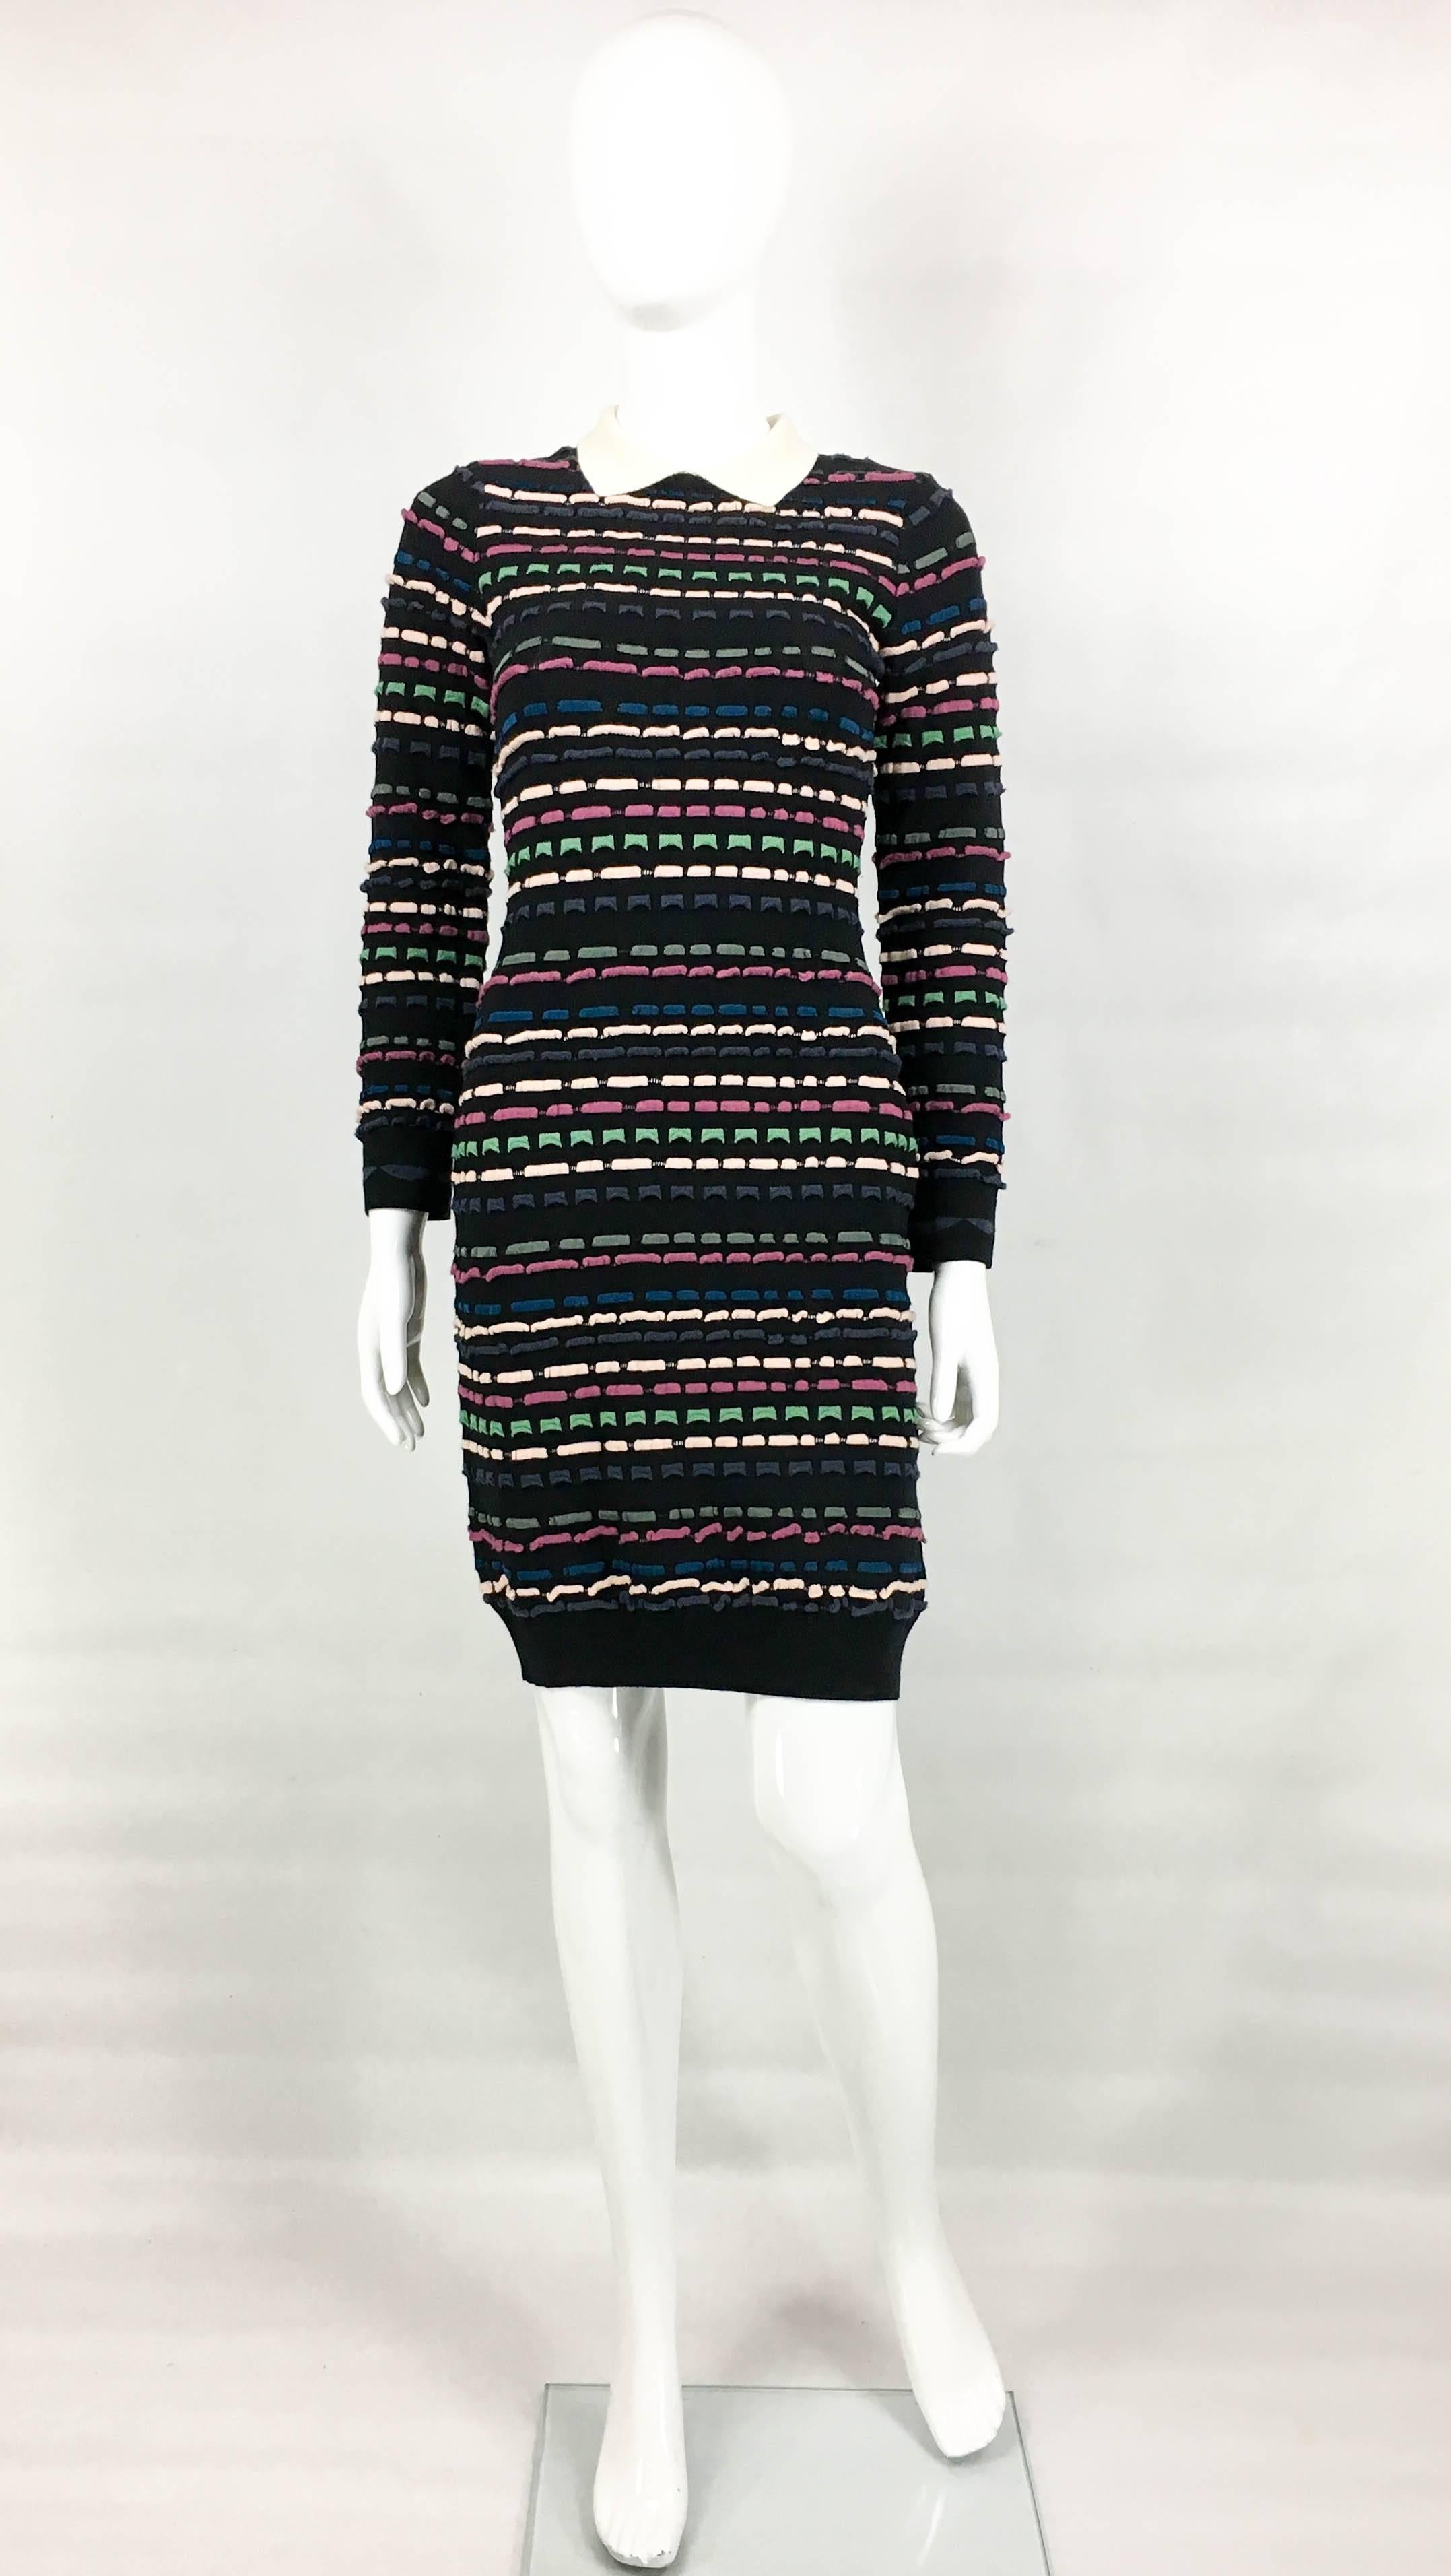 Missoni Multi-Coloured Striped Black Dress. This long-sleeve viscose-blend black dress has white polo collar. It features stripes of 3D colourful blocks throughout. A simple and fun dress to uplift the everyday wardrobe.

Label / Designer: